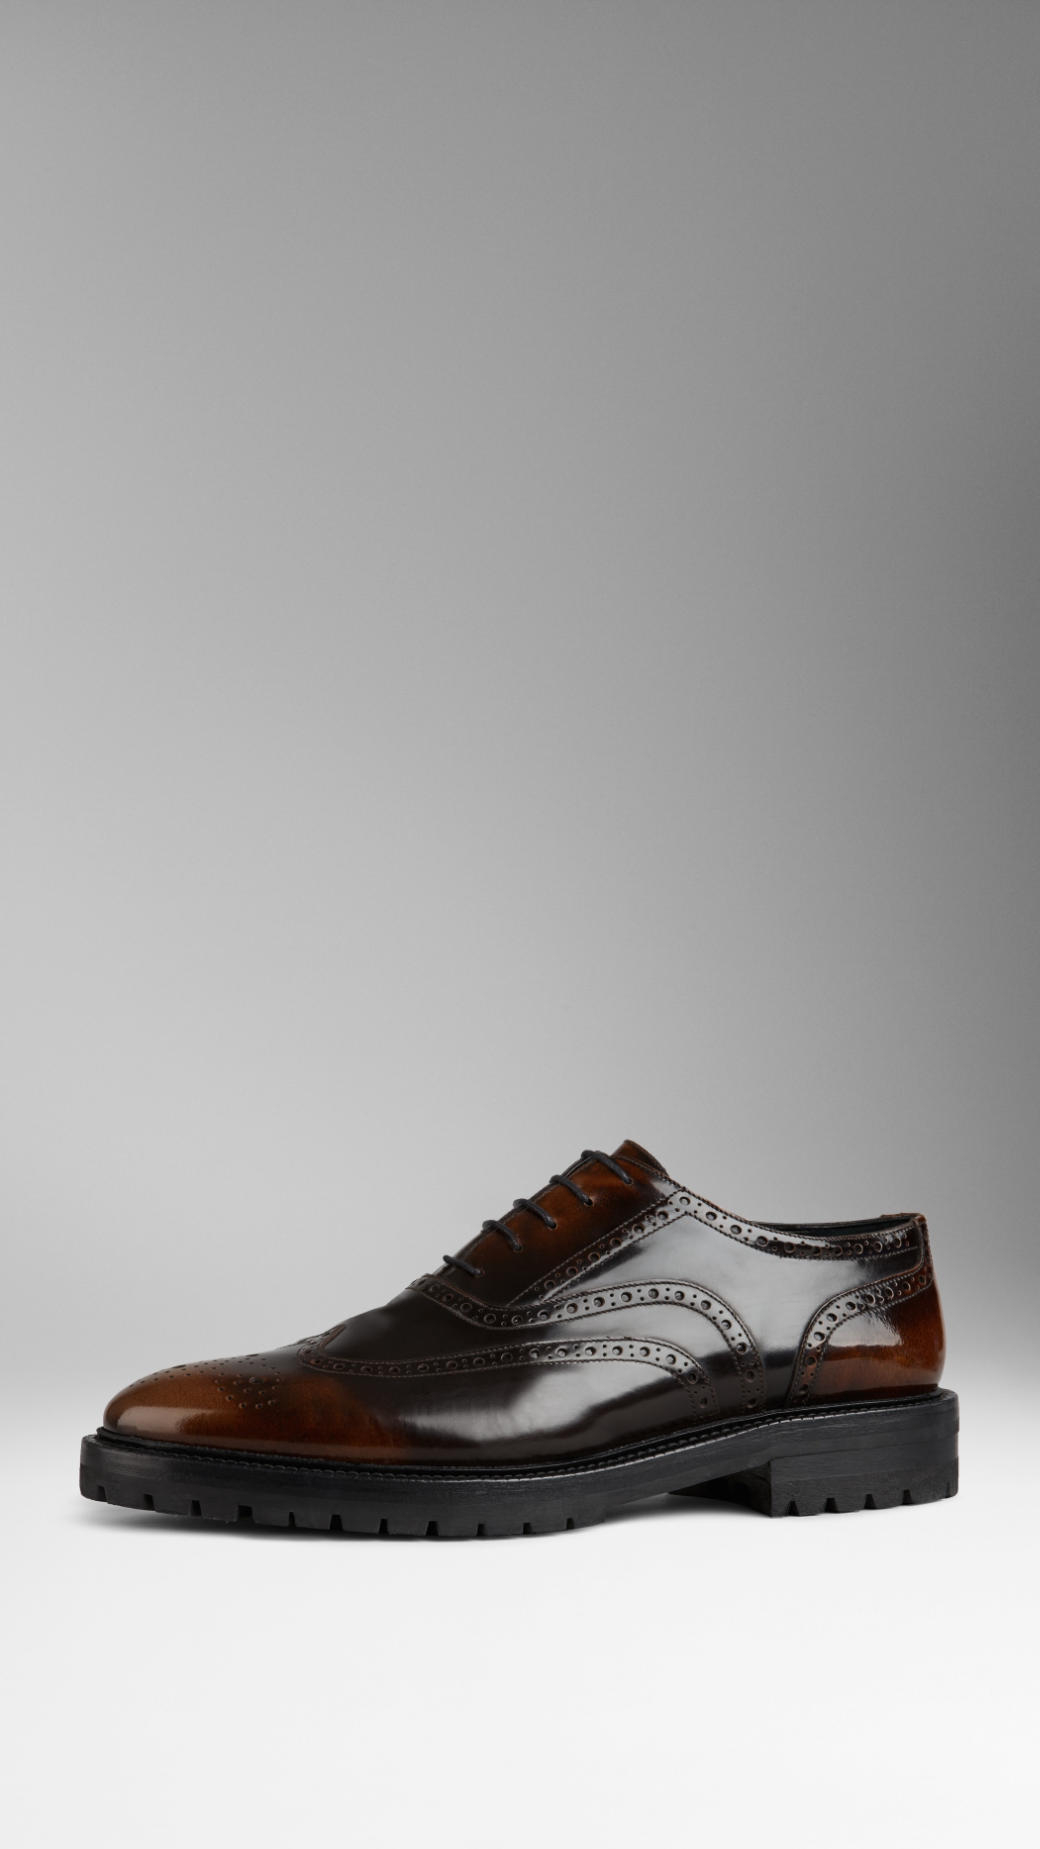 Burberry Leather Wingtip Brogues With Rubber Sole Bitter Chocolate in ...